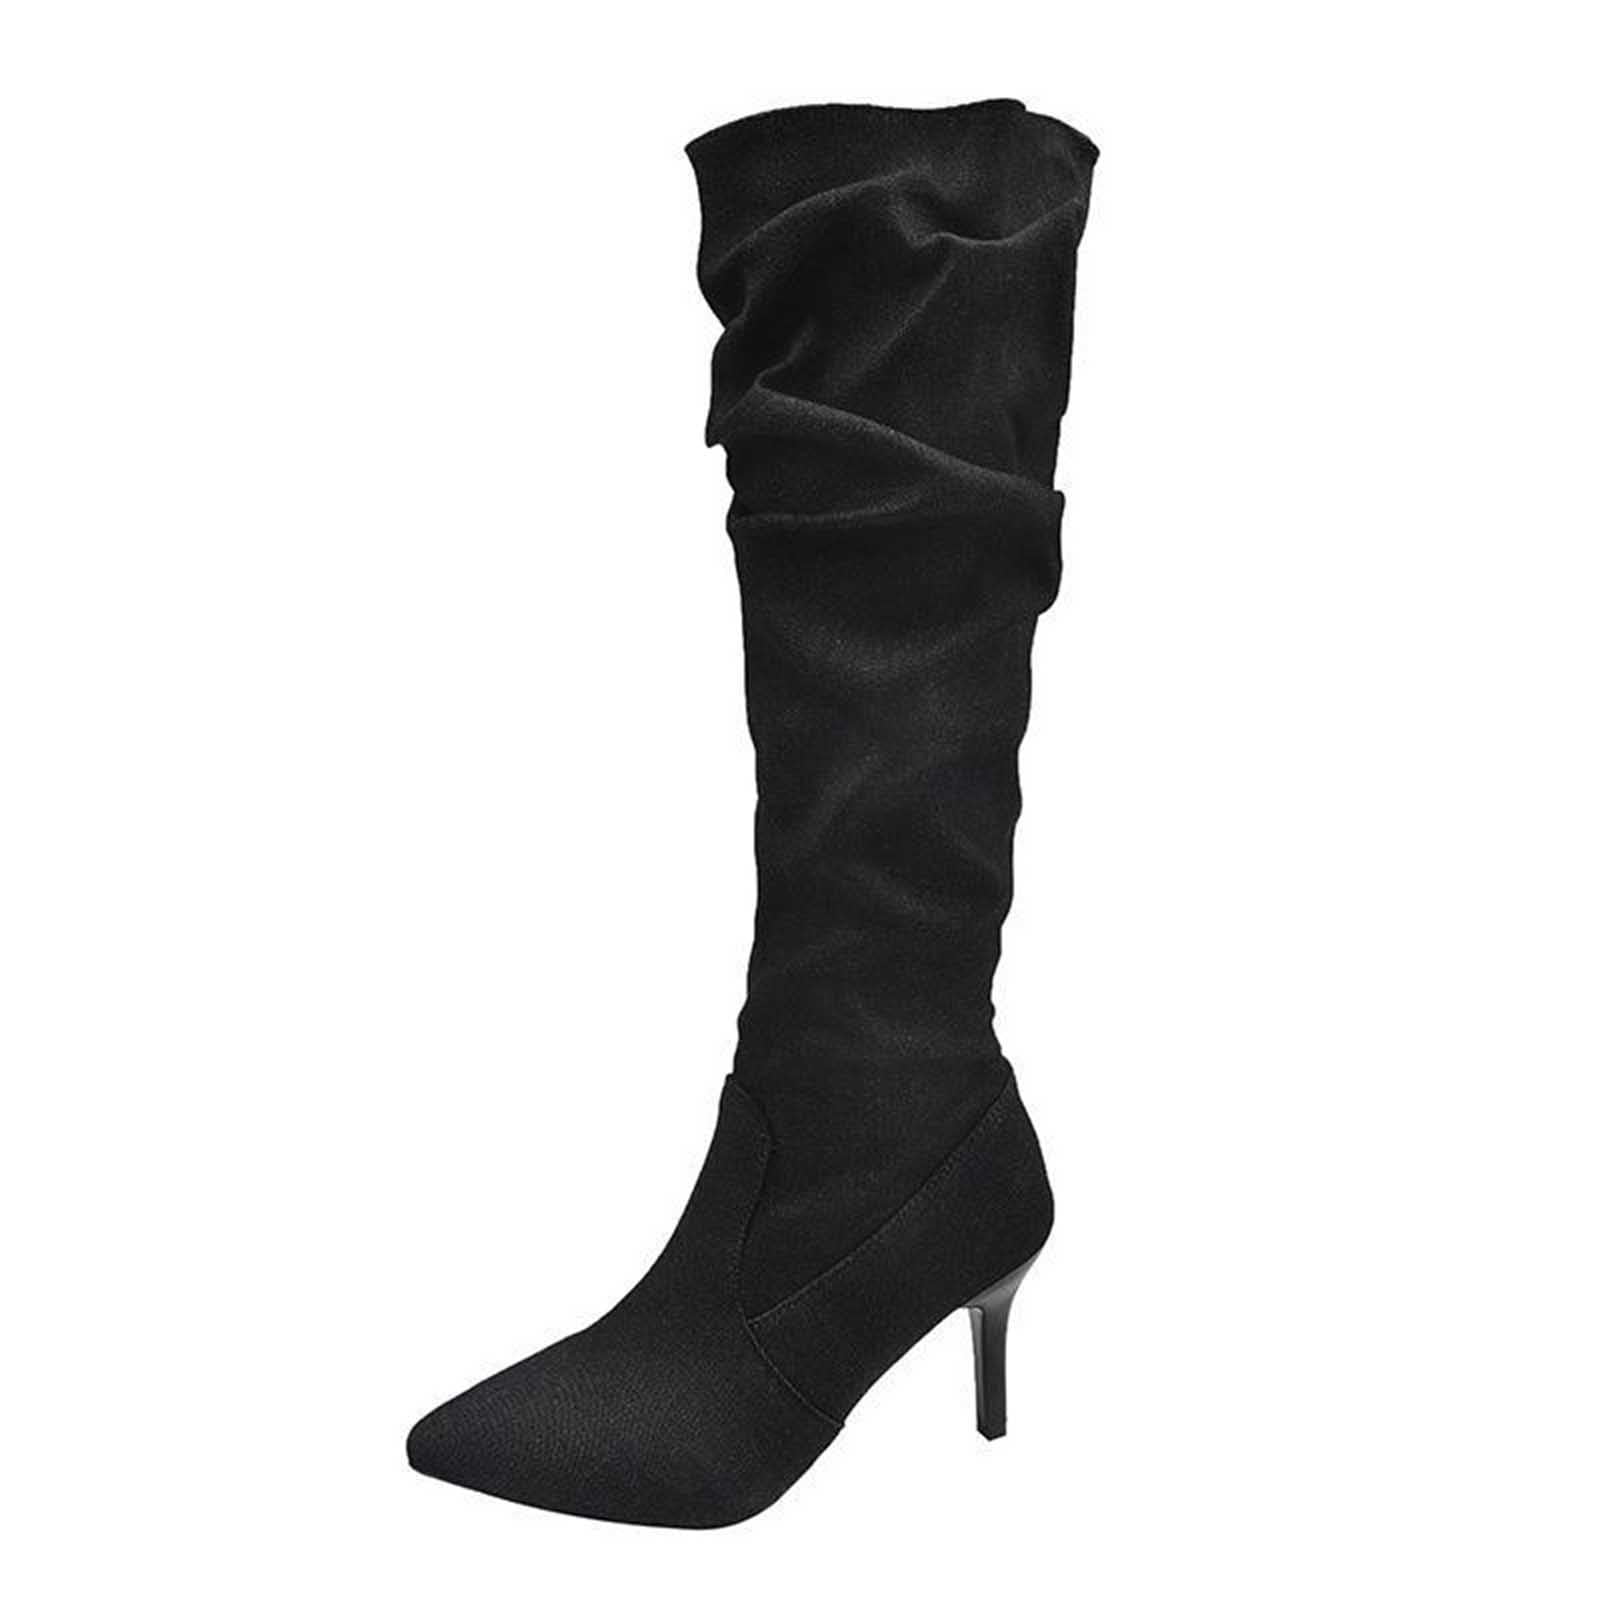 Jsaierl Knee High Boots For Women Sexy Stiletto High Heel Gogo Bootsleather Pointed Toe Chunky